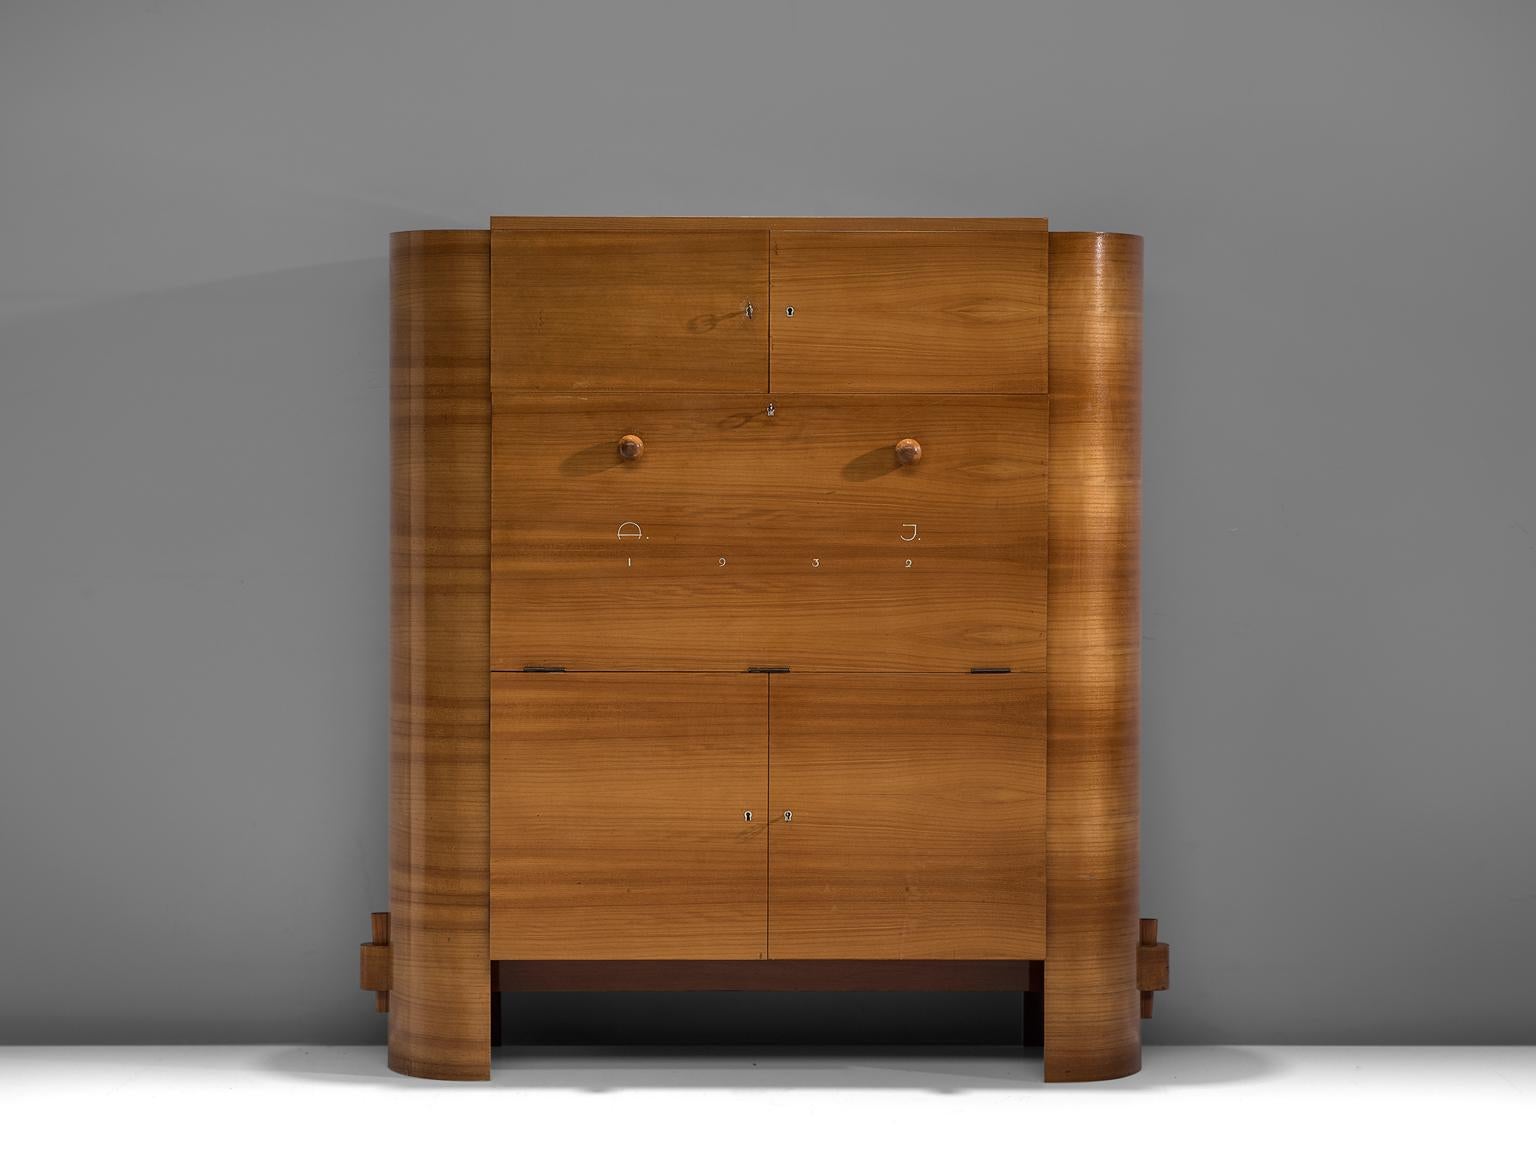 Art Deco cabinet, French walnut and brass, France, 1932.

Charming French Art Deco cabinet made of French walnut. The design features bulky forms, such as the round sides with archetypical joints on the sides. The cabinet offers plenty of storage